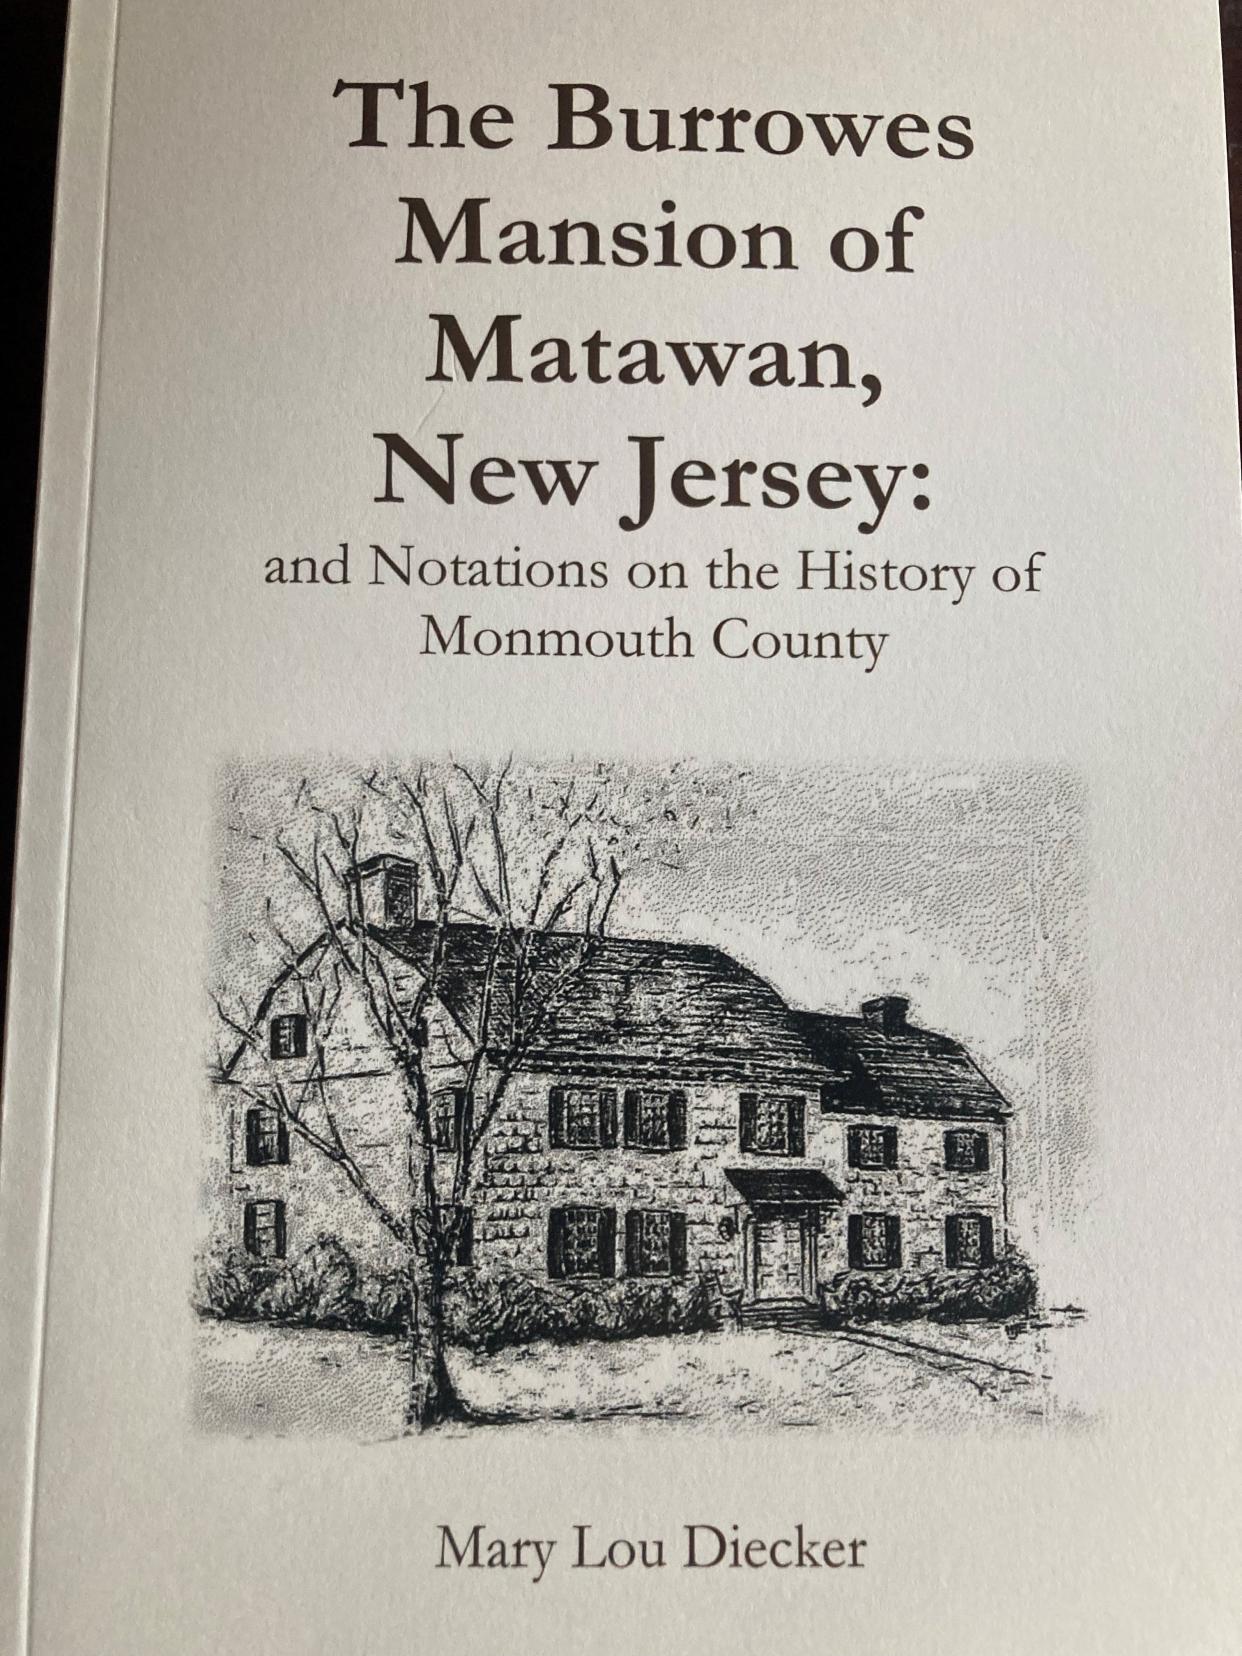 The updated edition of "The Burrowes Mansion of Matawan, New Jersey."